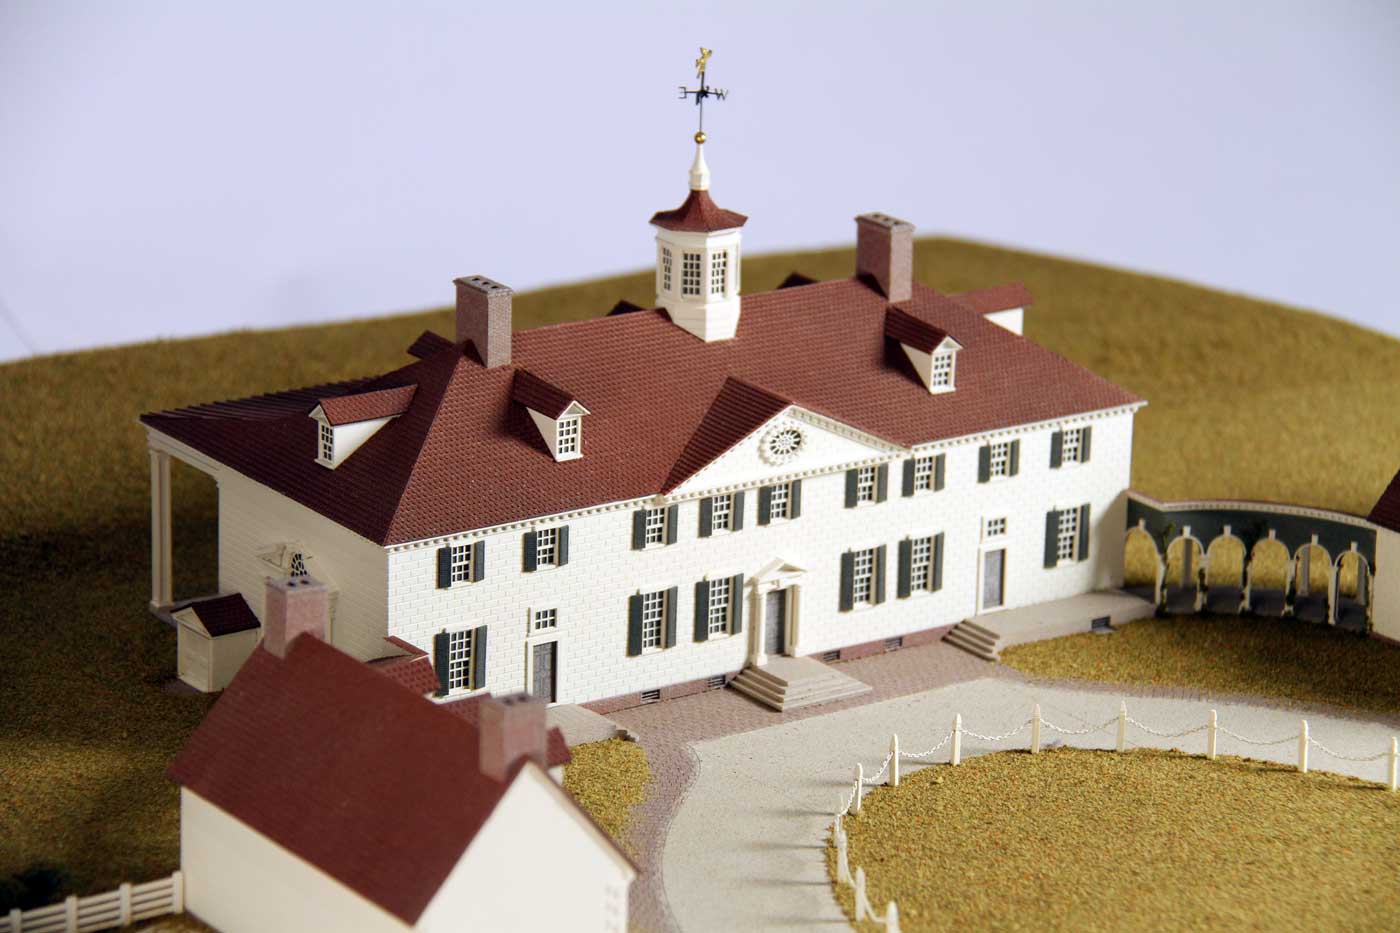 Mount Vernon, Alexandria, Virginia. Built by George Washington, mid-1700s. Model by Studios Eichbaum + Arnold, 2011. Photo by Museum staff.